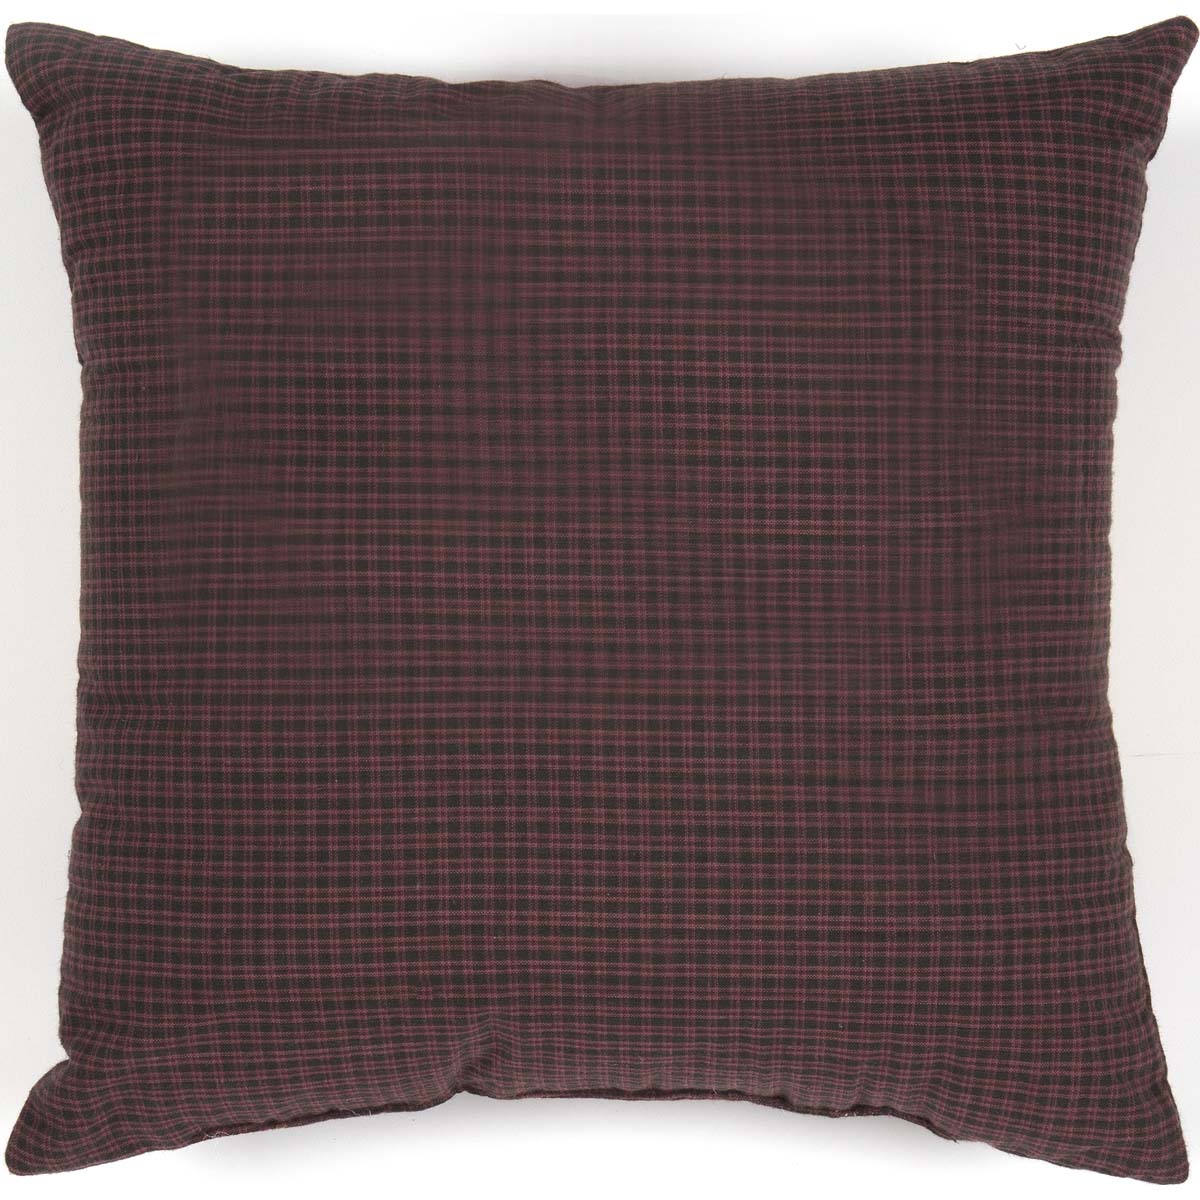 34300-Heritage-Farms-Love-Pillow-12x12-image-6